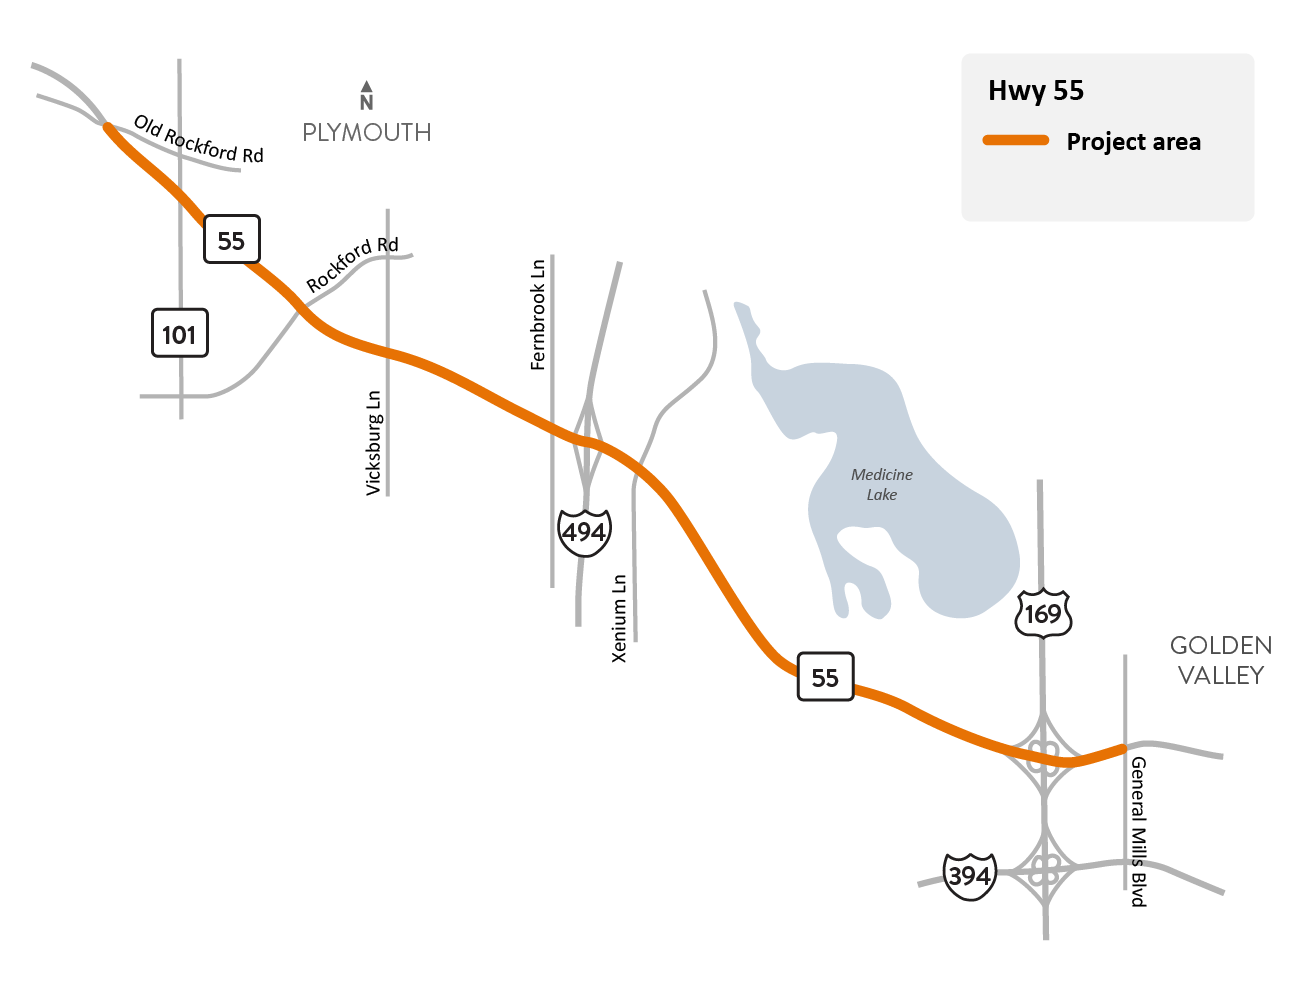 Hwy 55 between Old Rockford Road in Plymouth and General Mills Boulevard in Golden Valley project location map